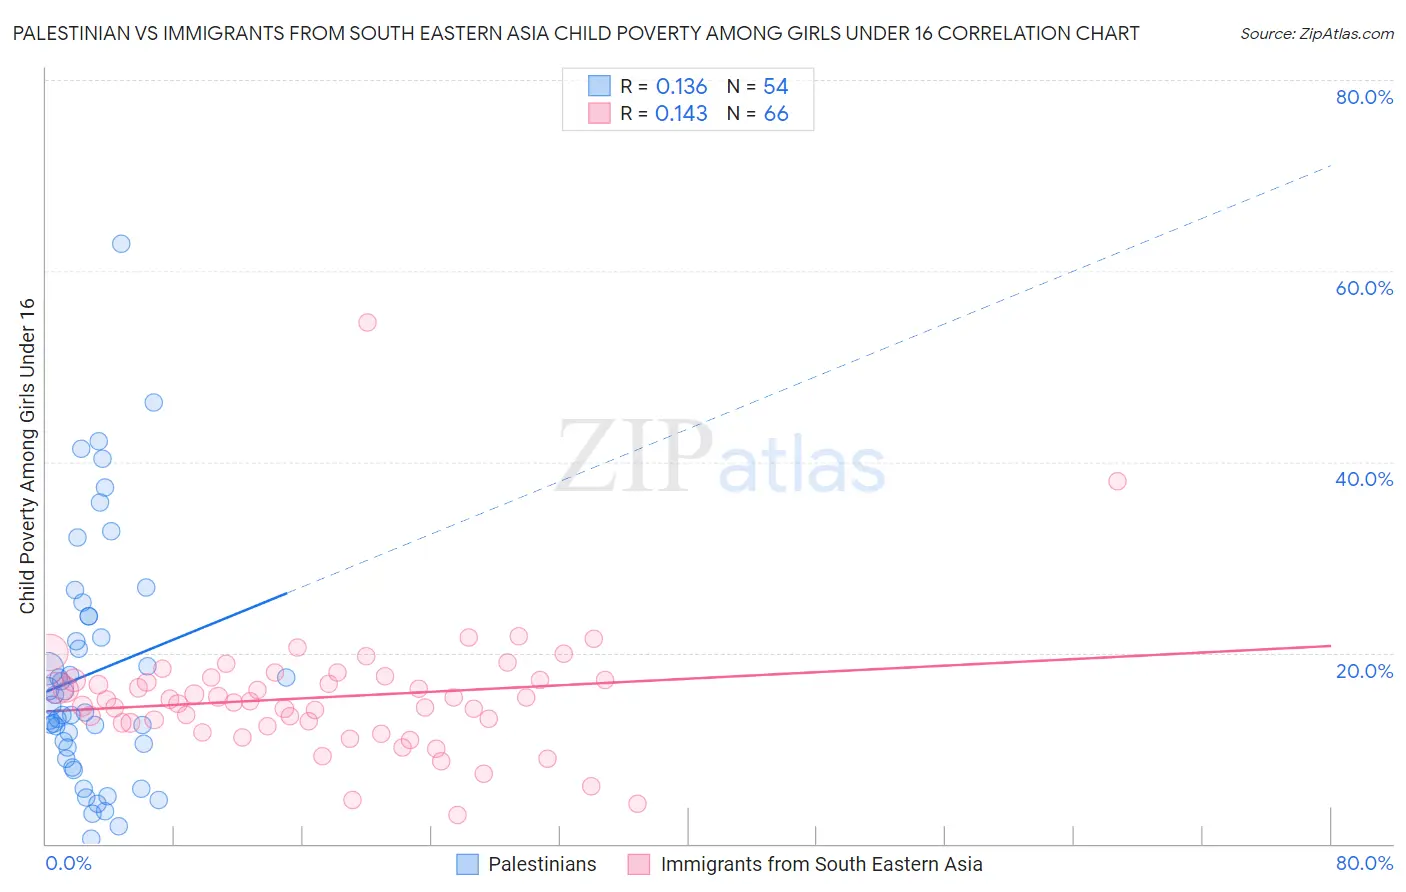 Palestinian vs Immigrants from South Eastern Asia Child Poverty Among Girls Under 16